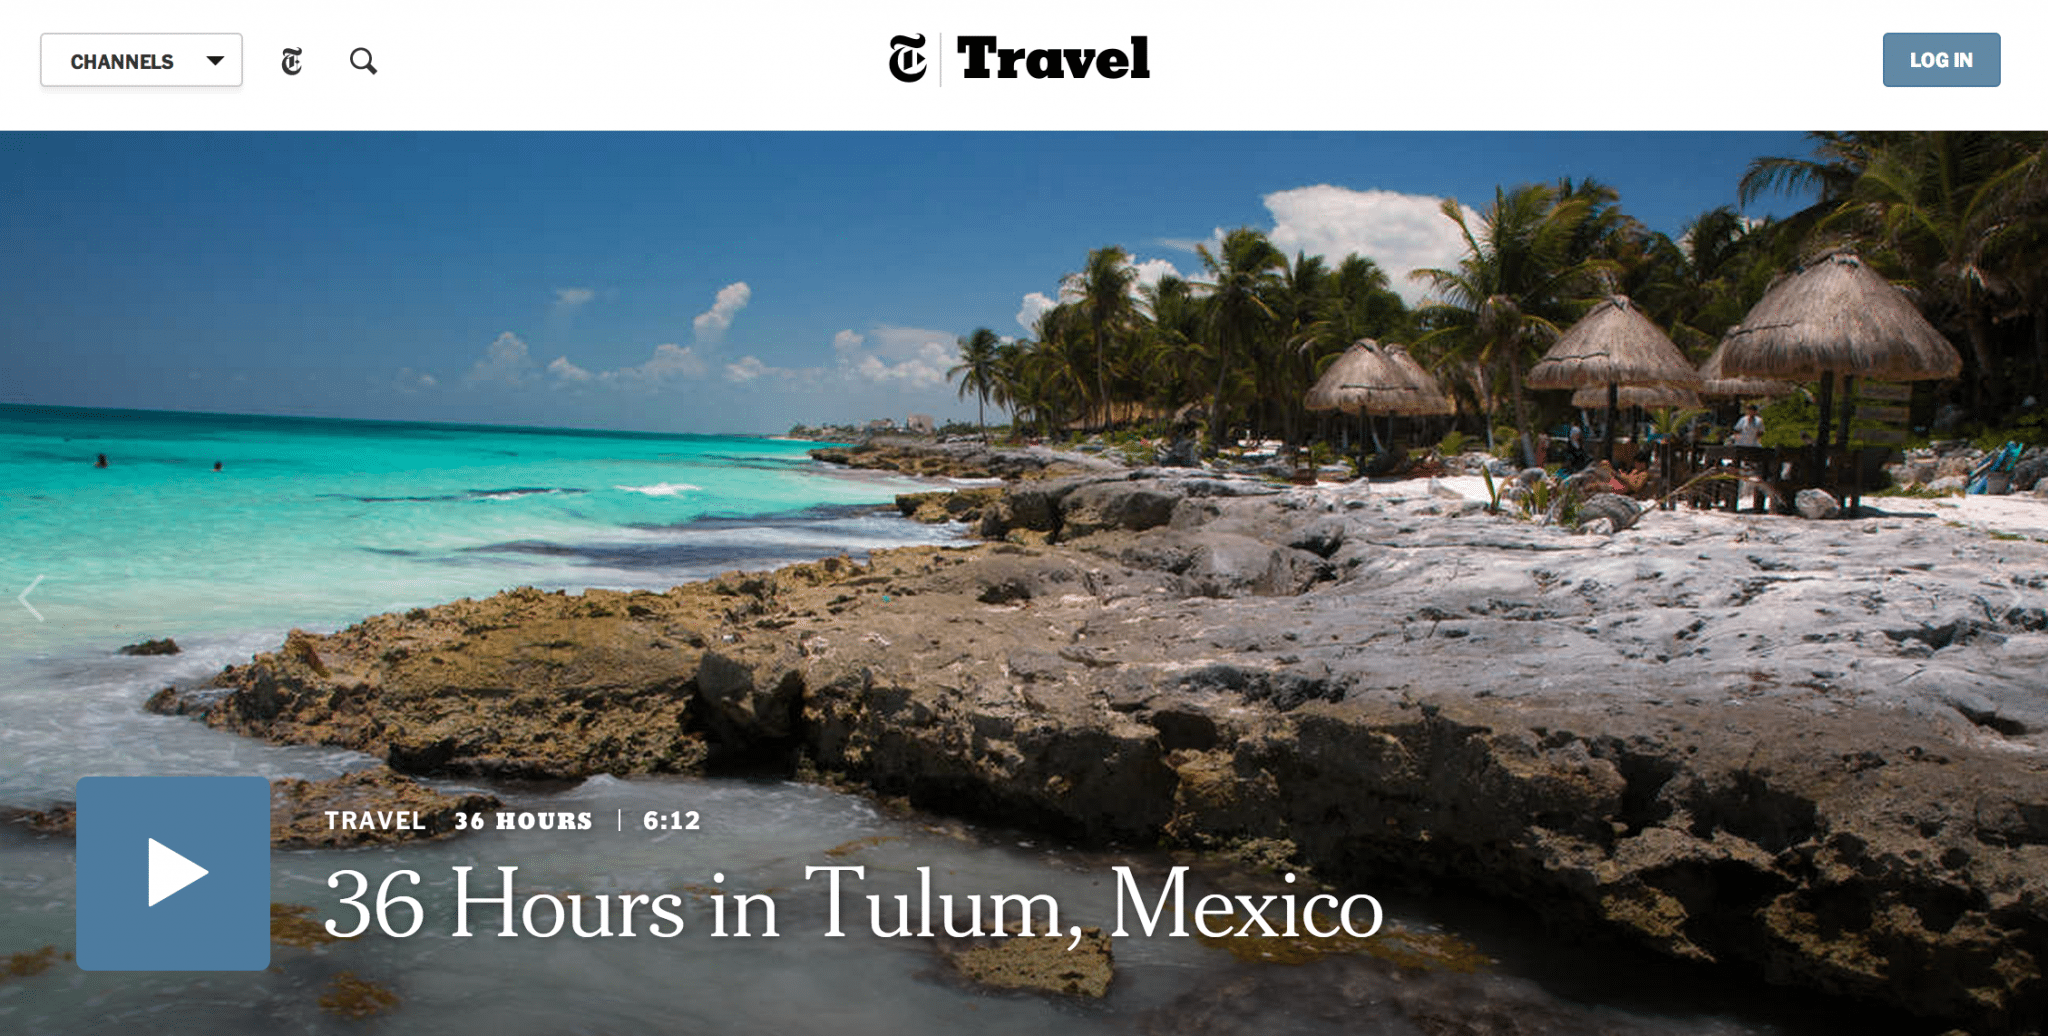 The New York Times Travel section's 